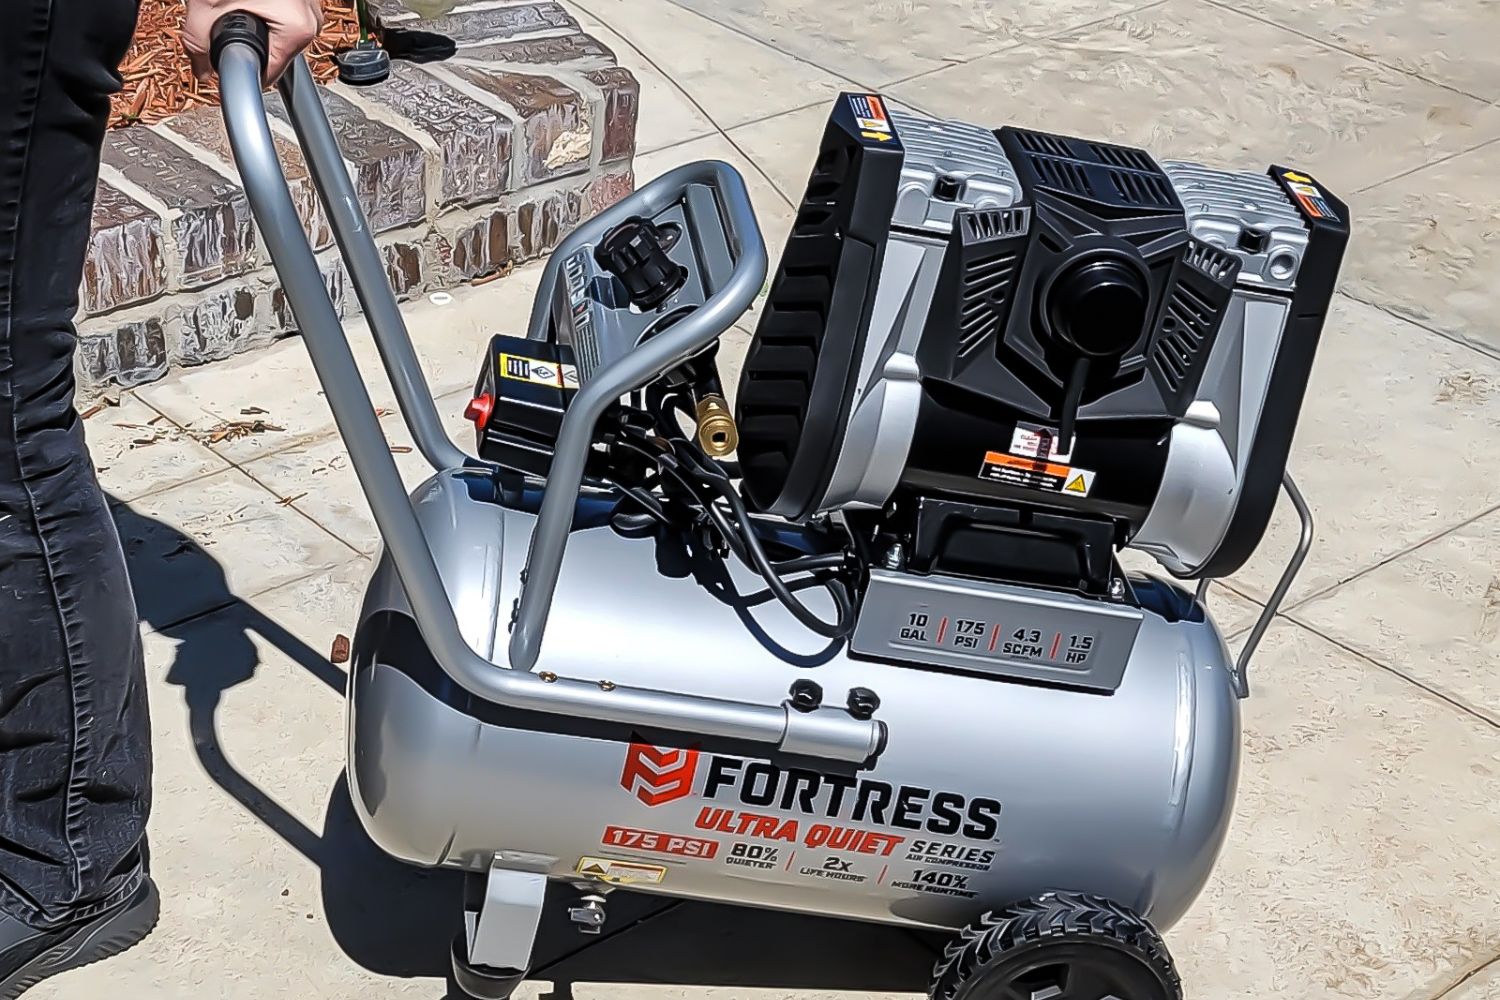 A person moving the Harbor Freight Fortress air compressor by using its wheels and handle